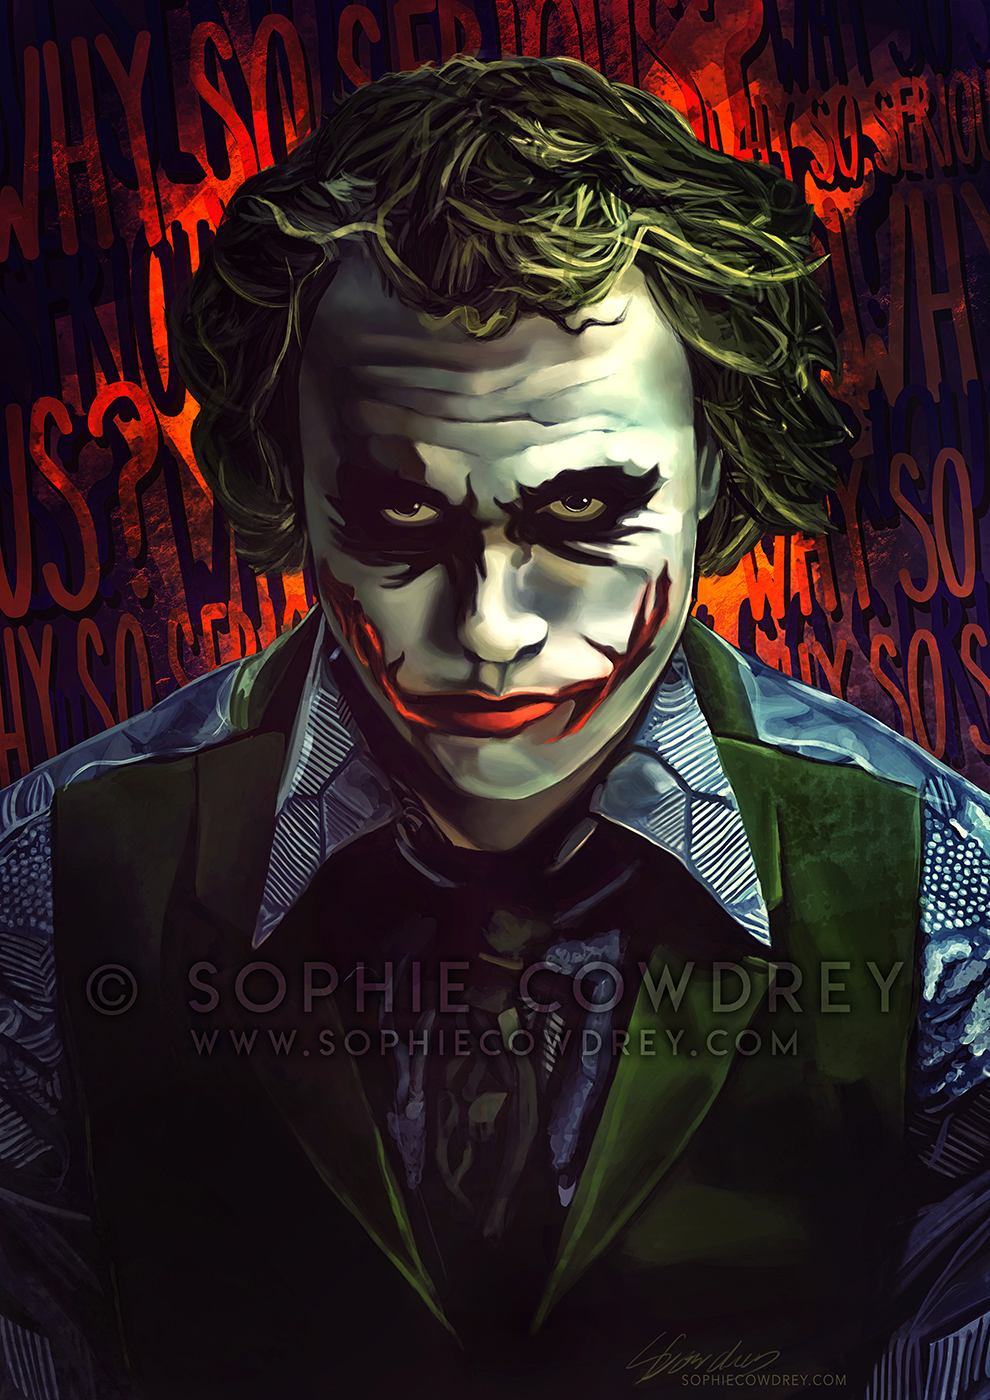 Why So Serious? by sophiecowdrey on DeviantArt